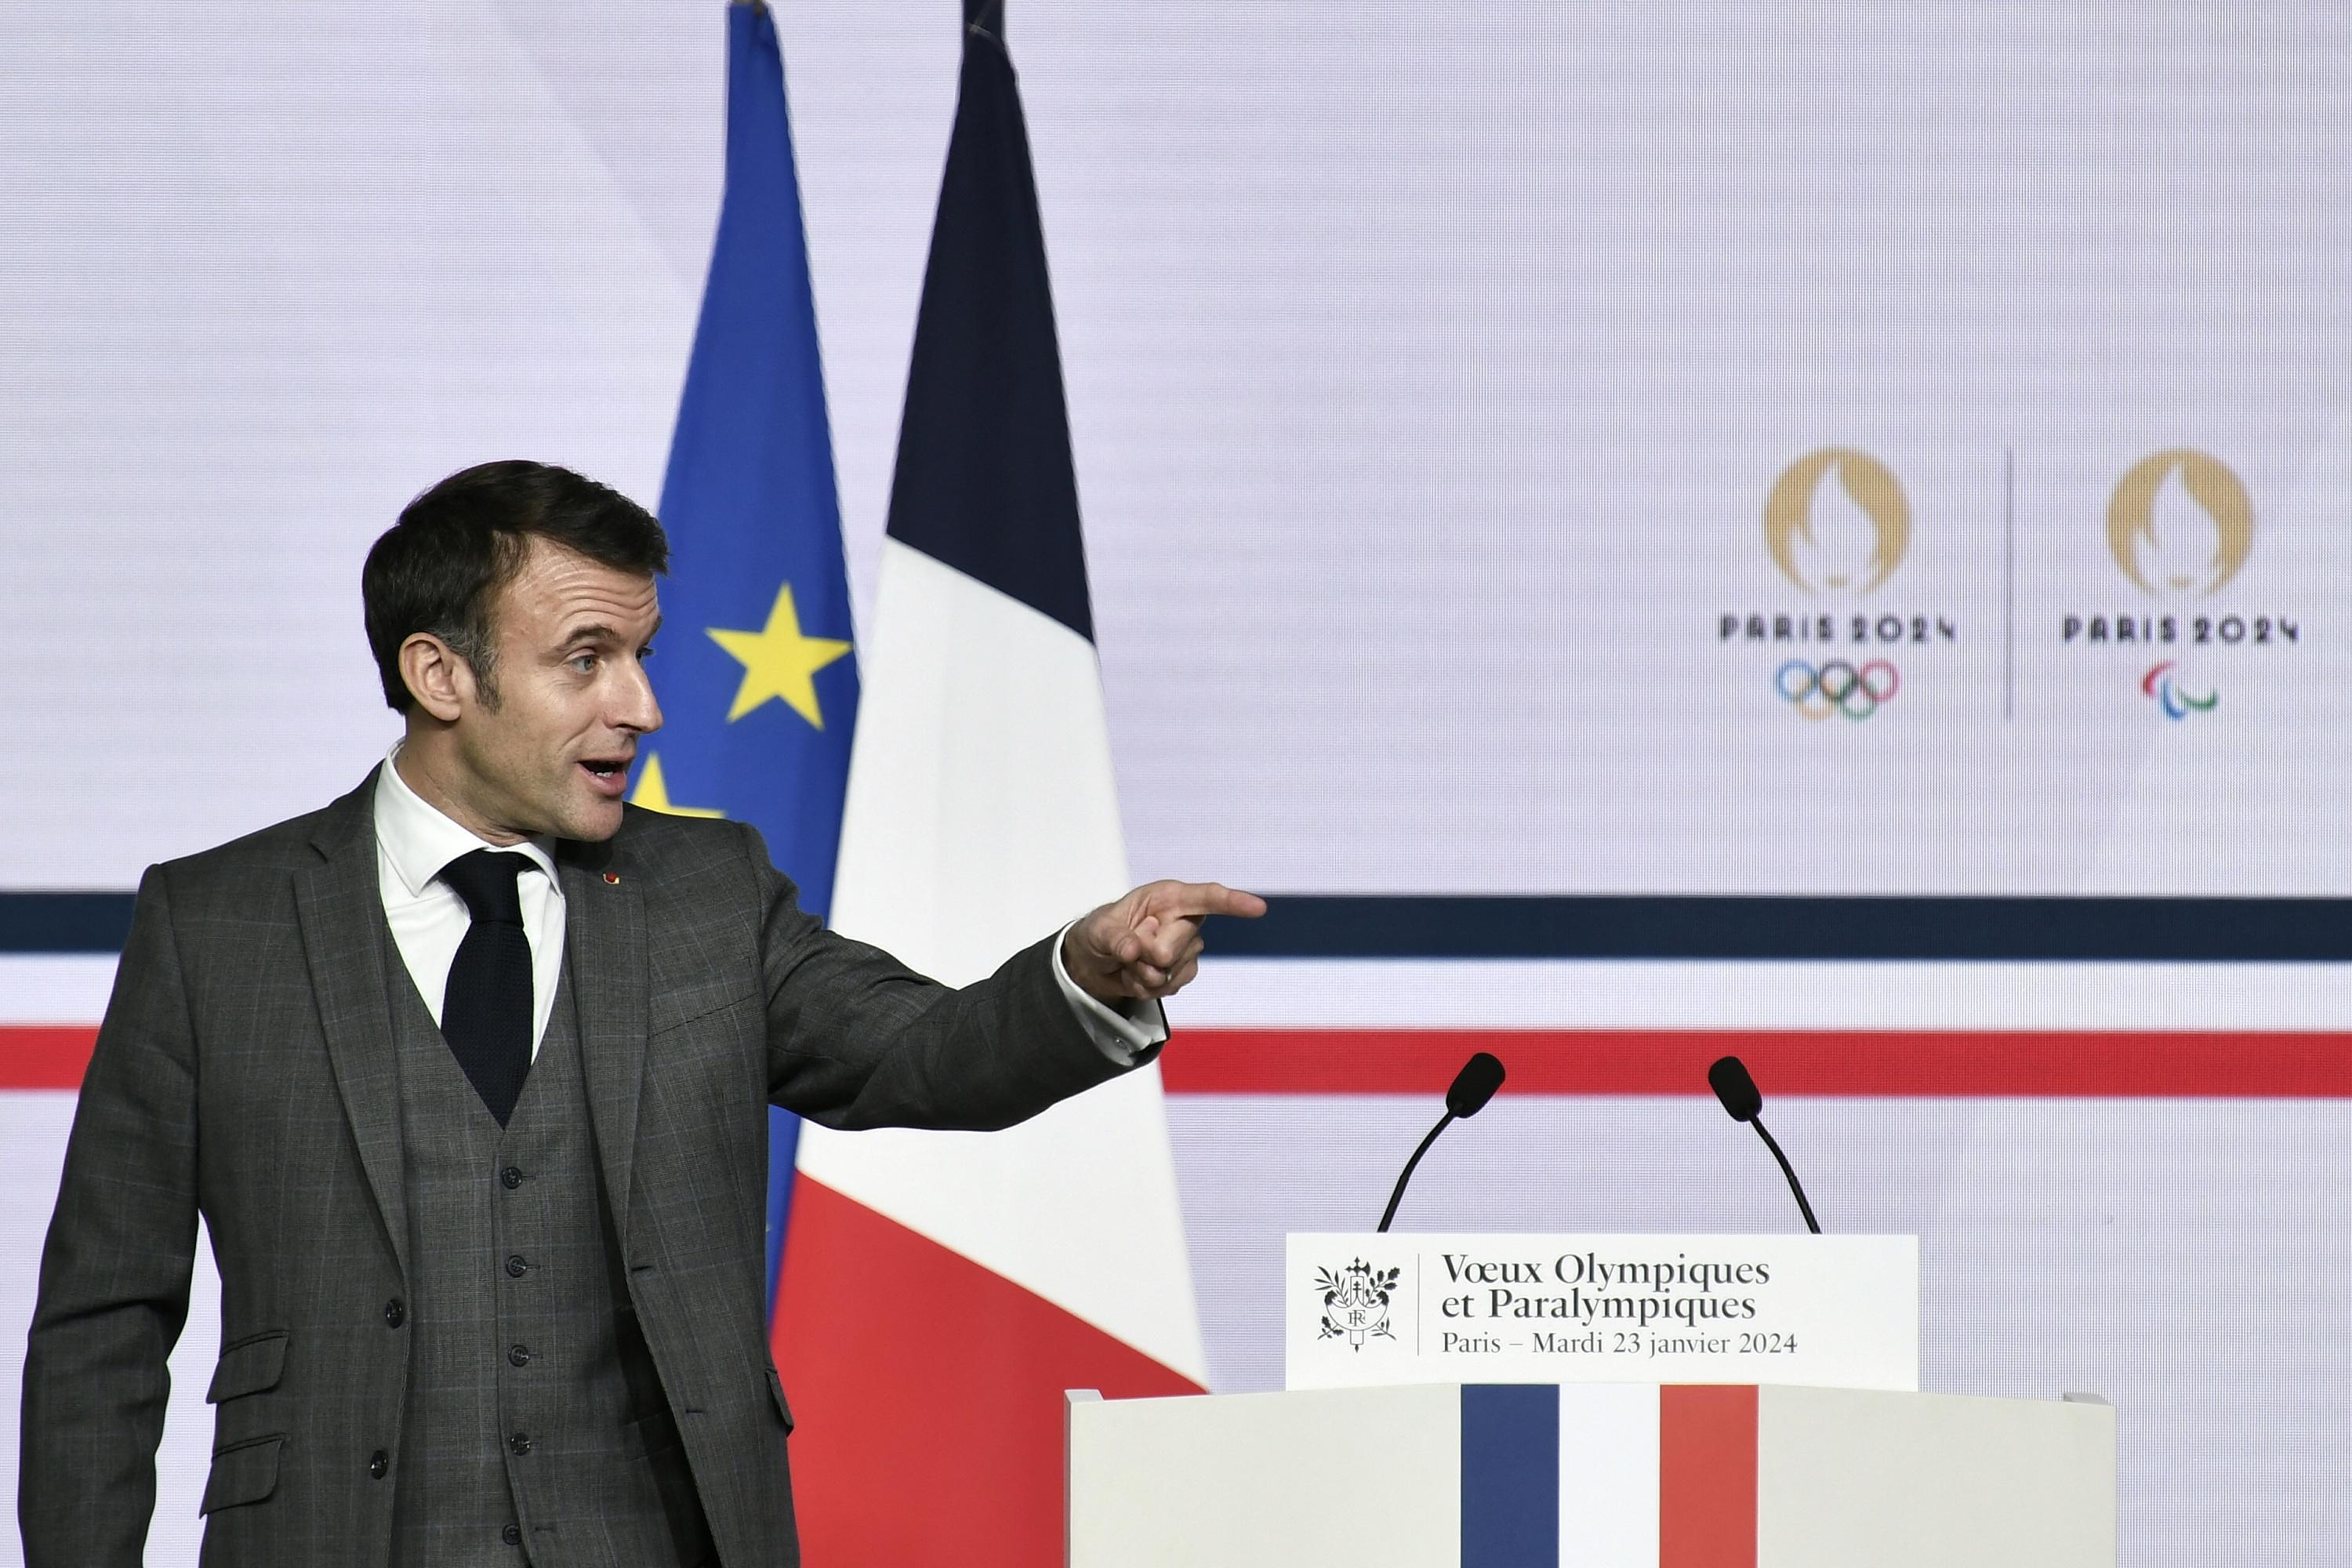 Top 5, security, transport… Macron’s strong ambitions for the 2024 Olympics